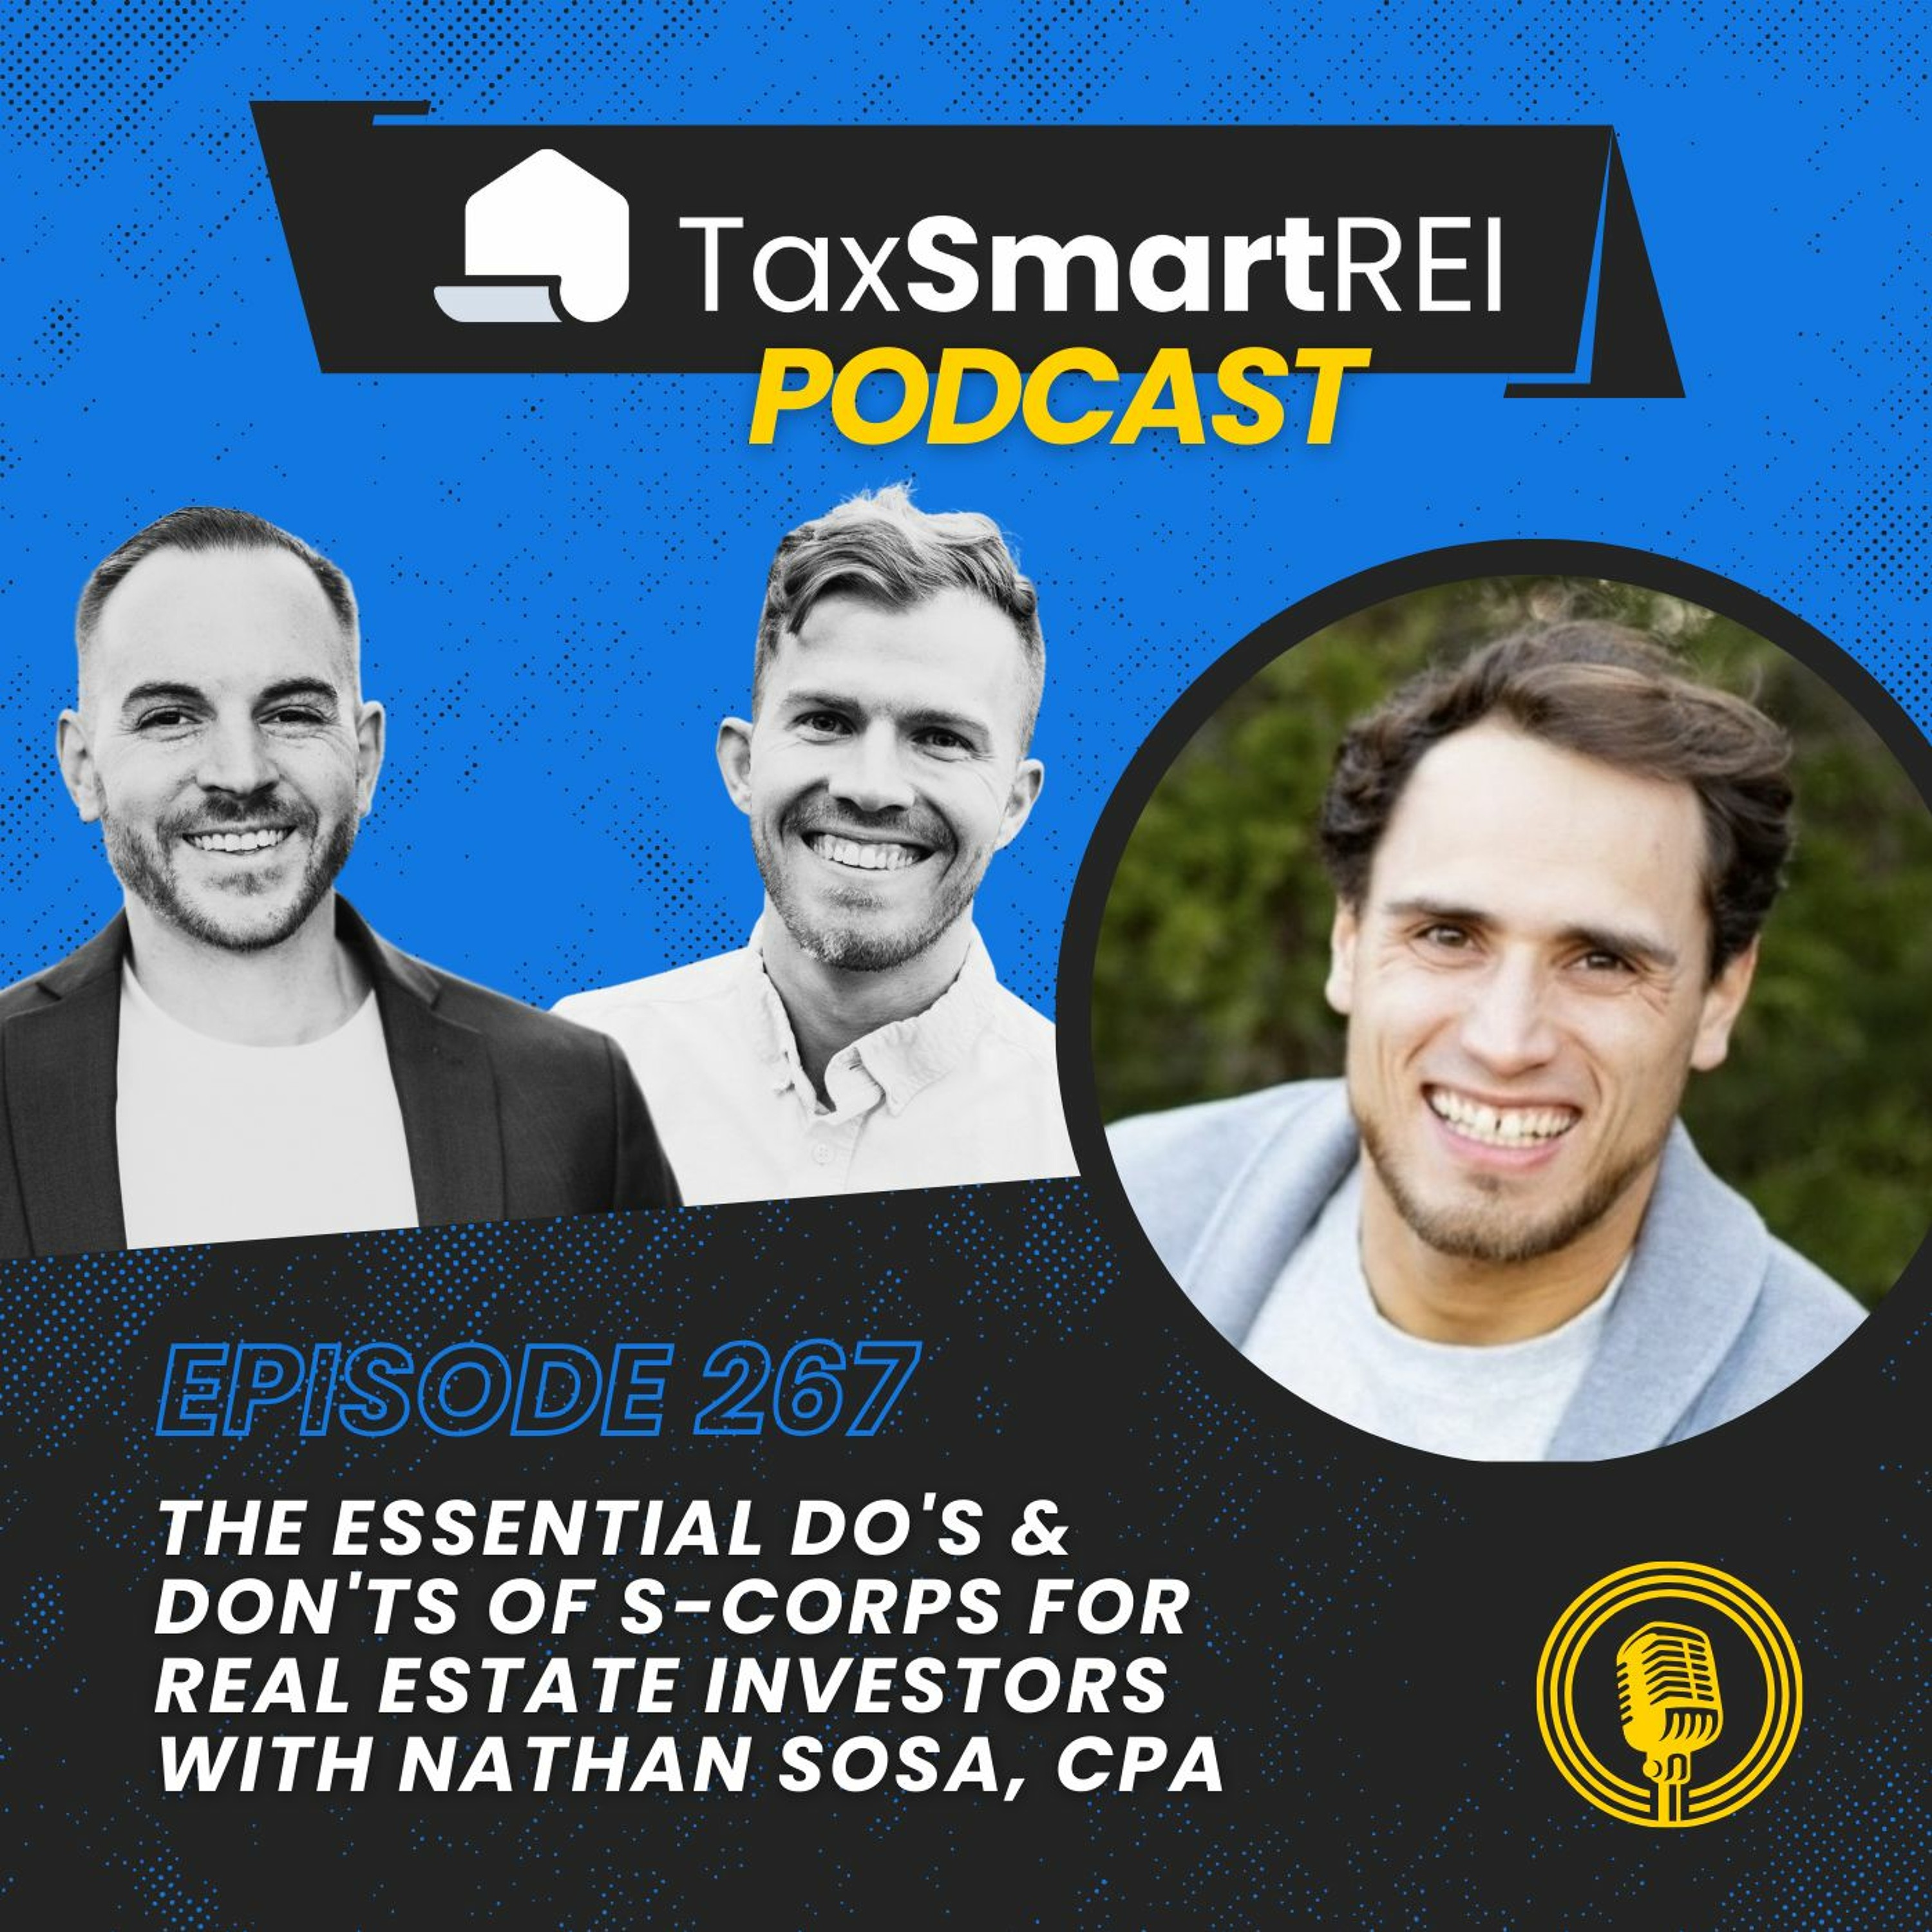 267. The Essential Do’s & Don’ts of S-Corps for Real Estate Investors with Nathan Sosa, CPA